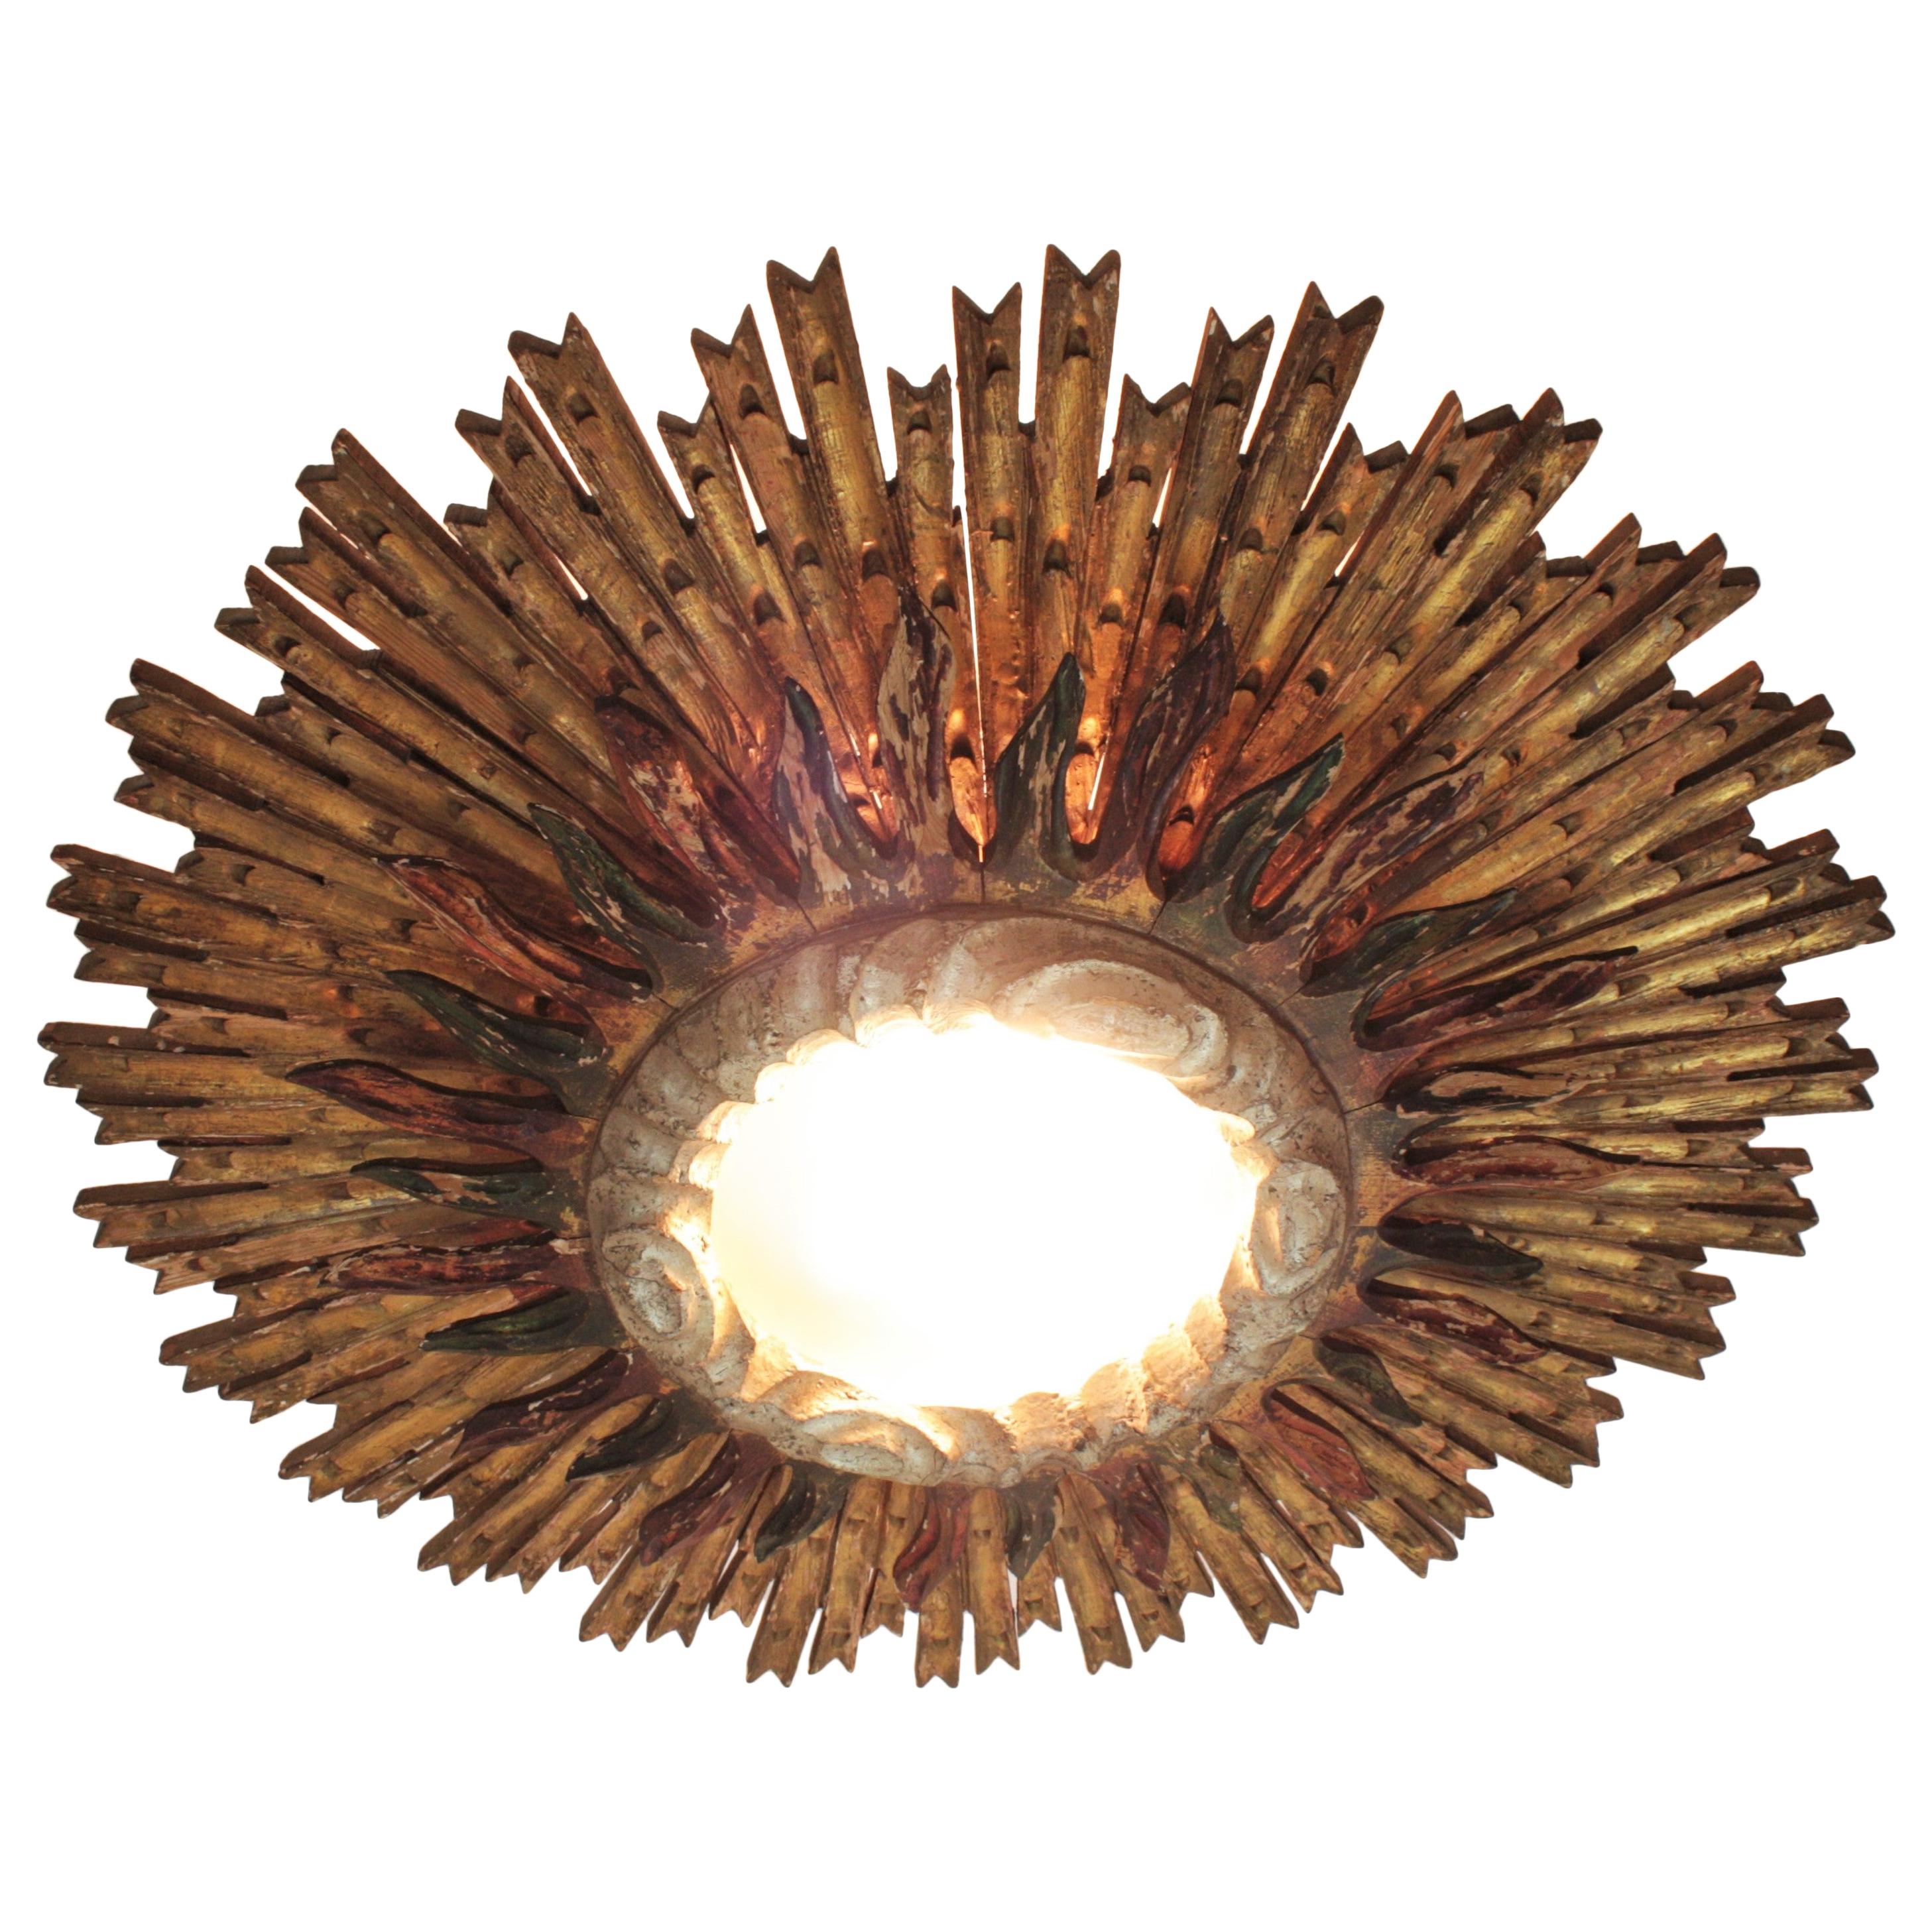 Carved Spanish Sunburst Ceiling Light Fixture in Giltwood, Baroque Style